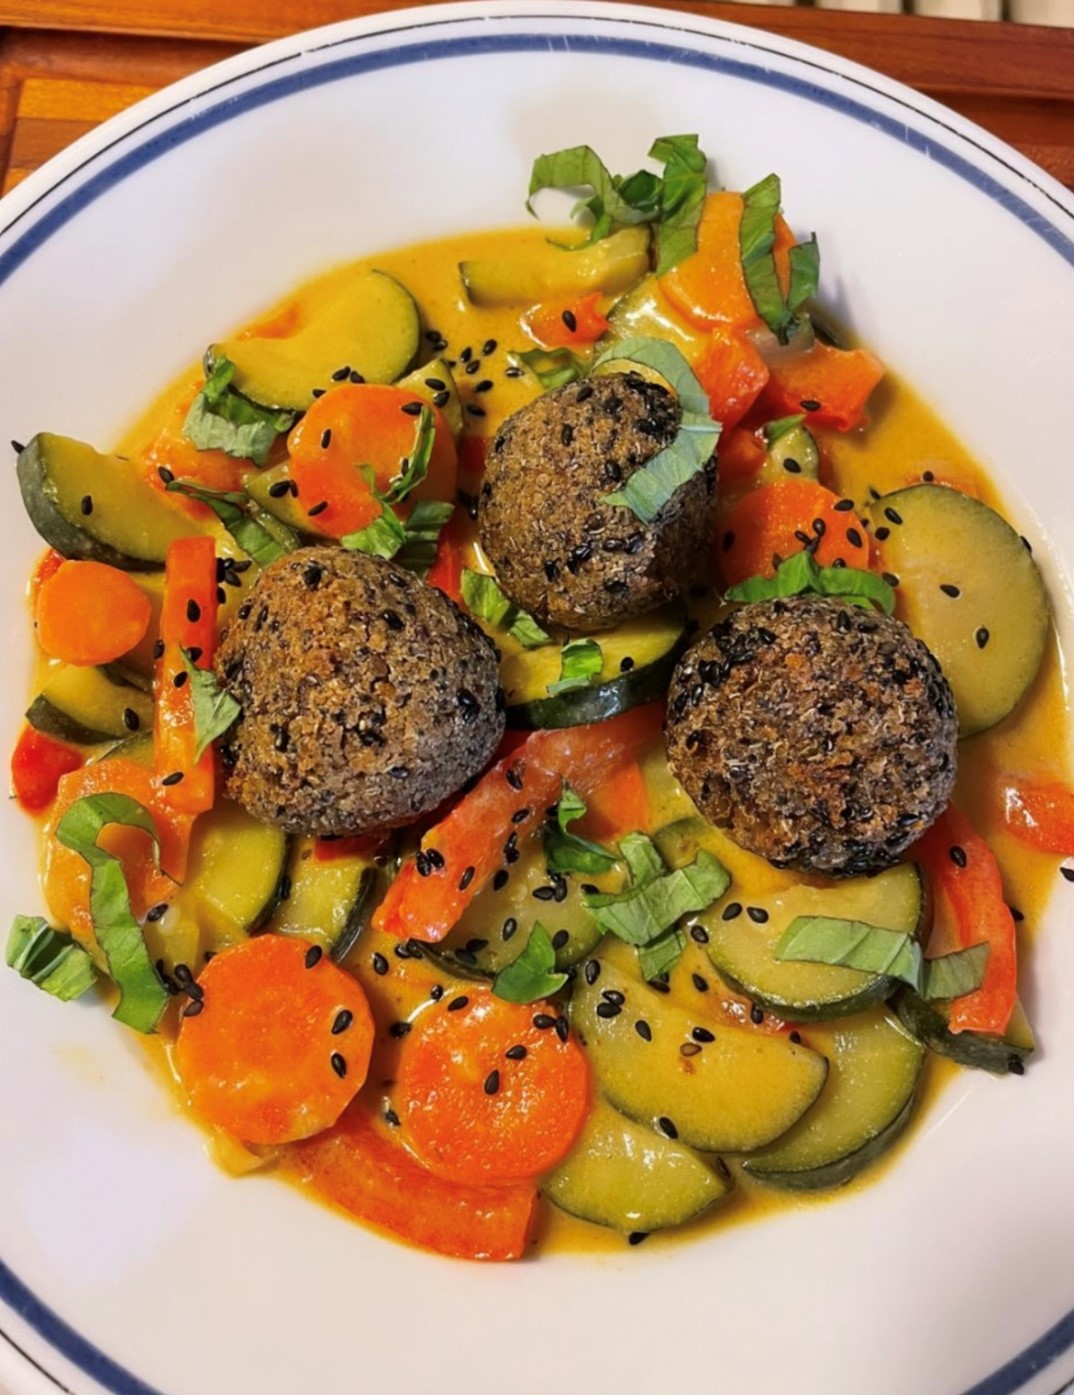 https://www.artscapecod.org/wp-content/uploads/sites/www.artscapecod.org/images/2022/06/event-featured-crispy-chickpea-quinoa-balls-in-veggie-yellow-curry-broth-with-agatha-buisson-1655400906.jpeg